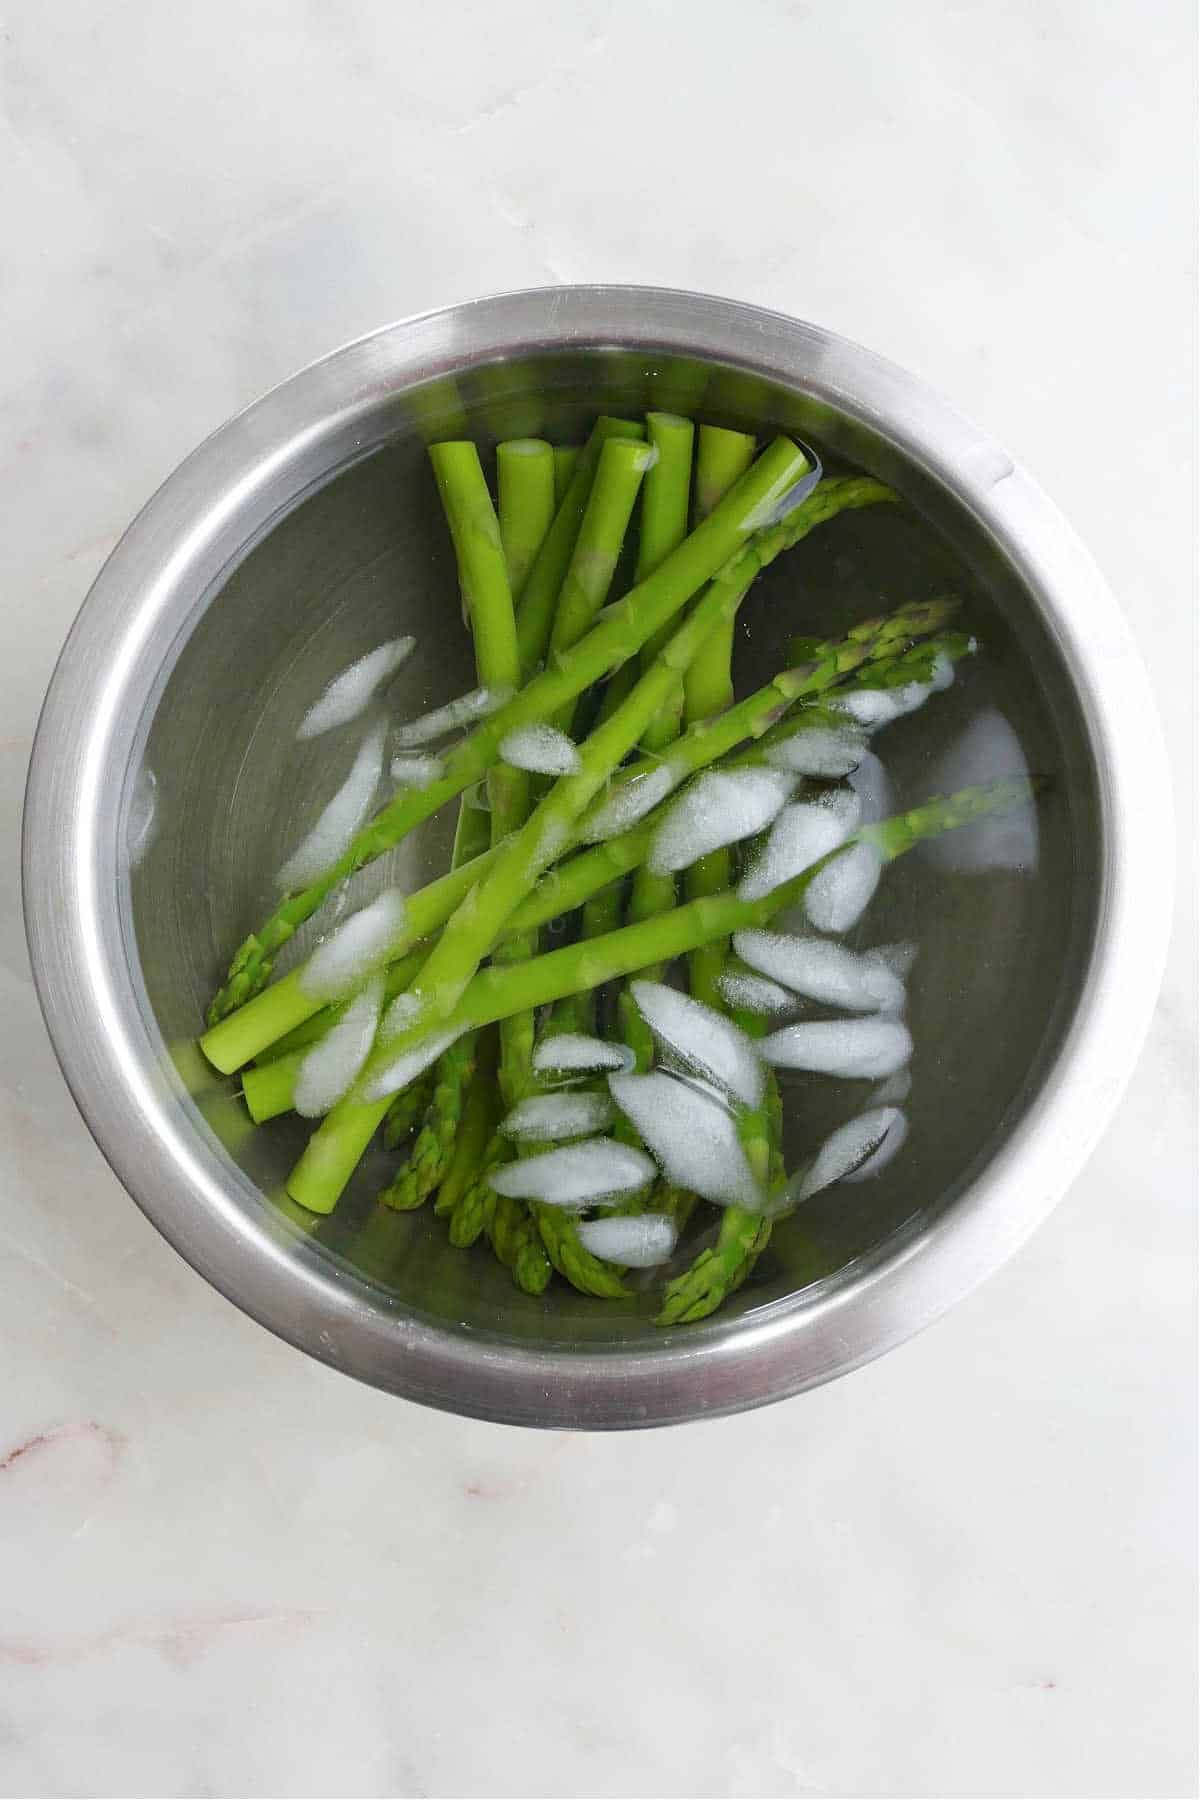 asparagus spears submerged in a bowl of ice water on a counter